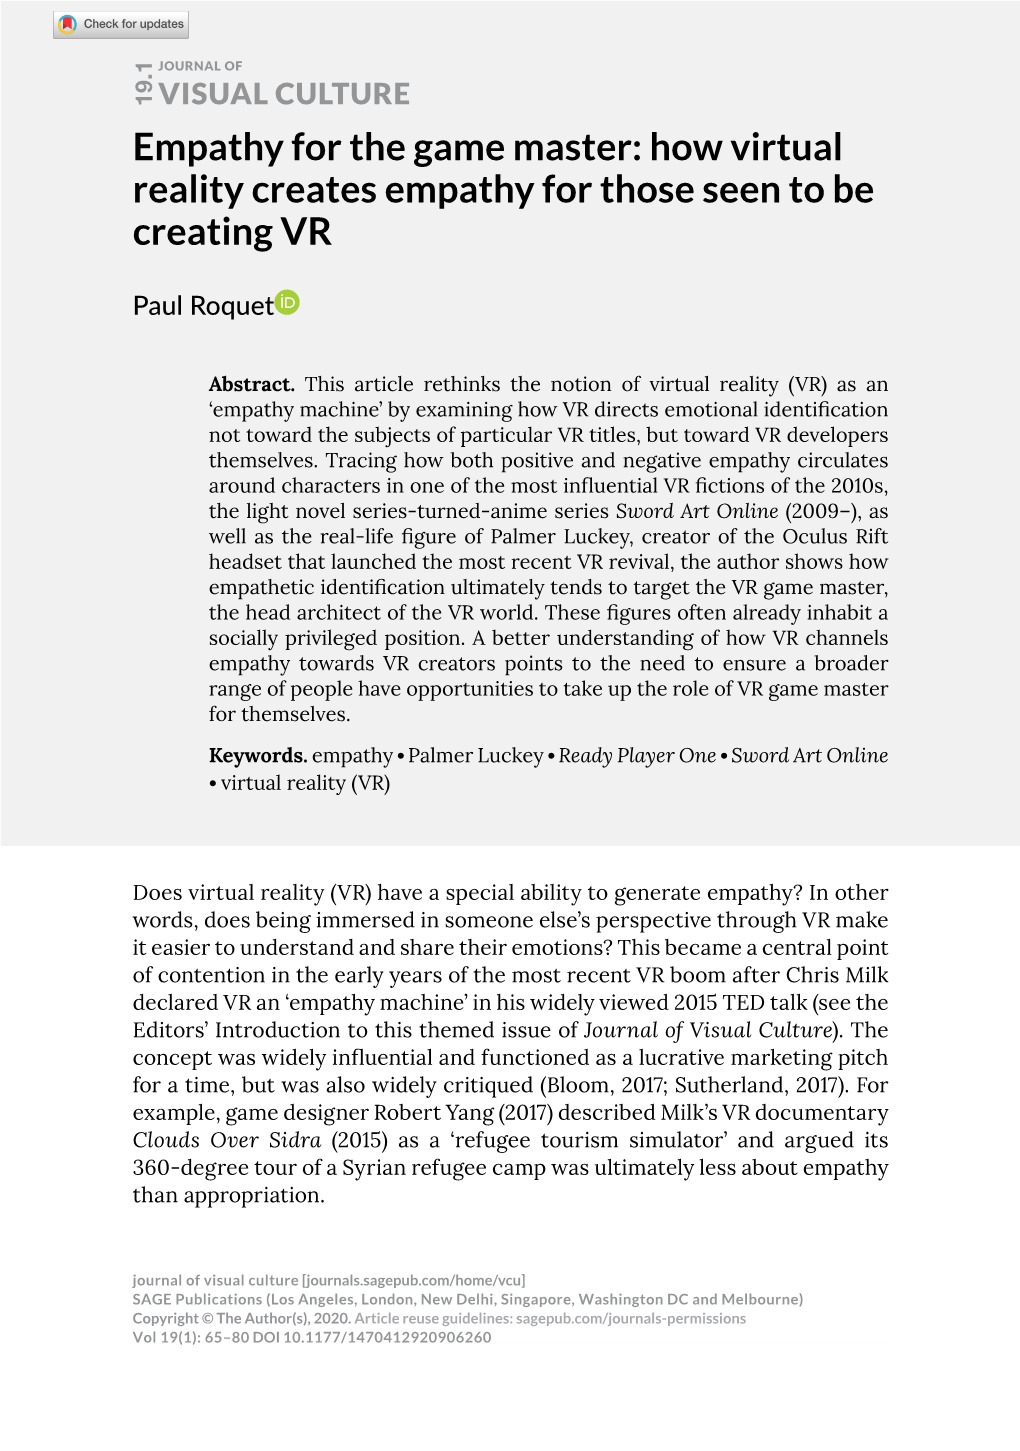 VISUAL CULTURE Empathy for the Game Master: How Virtual Reality Creates Empathy for Those Seen to Be Creating VR